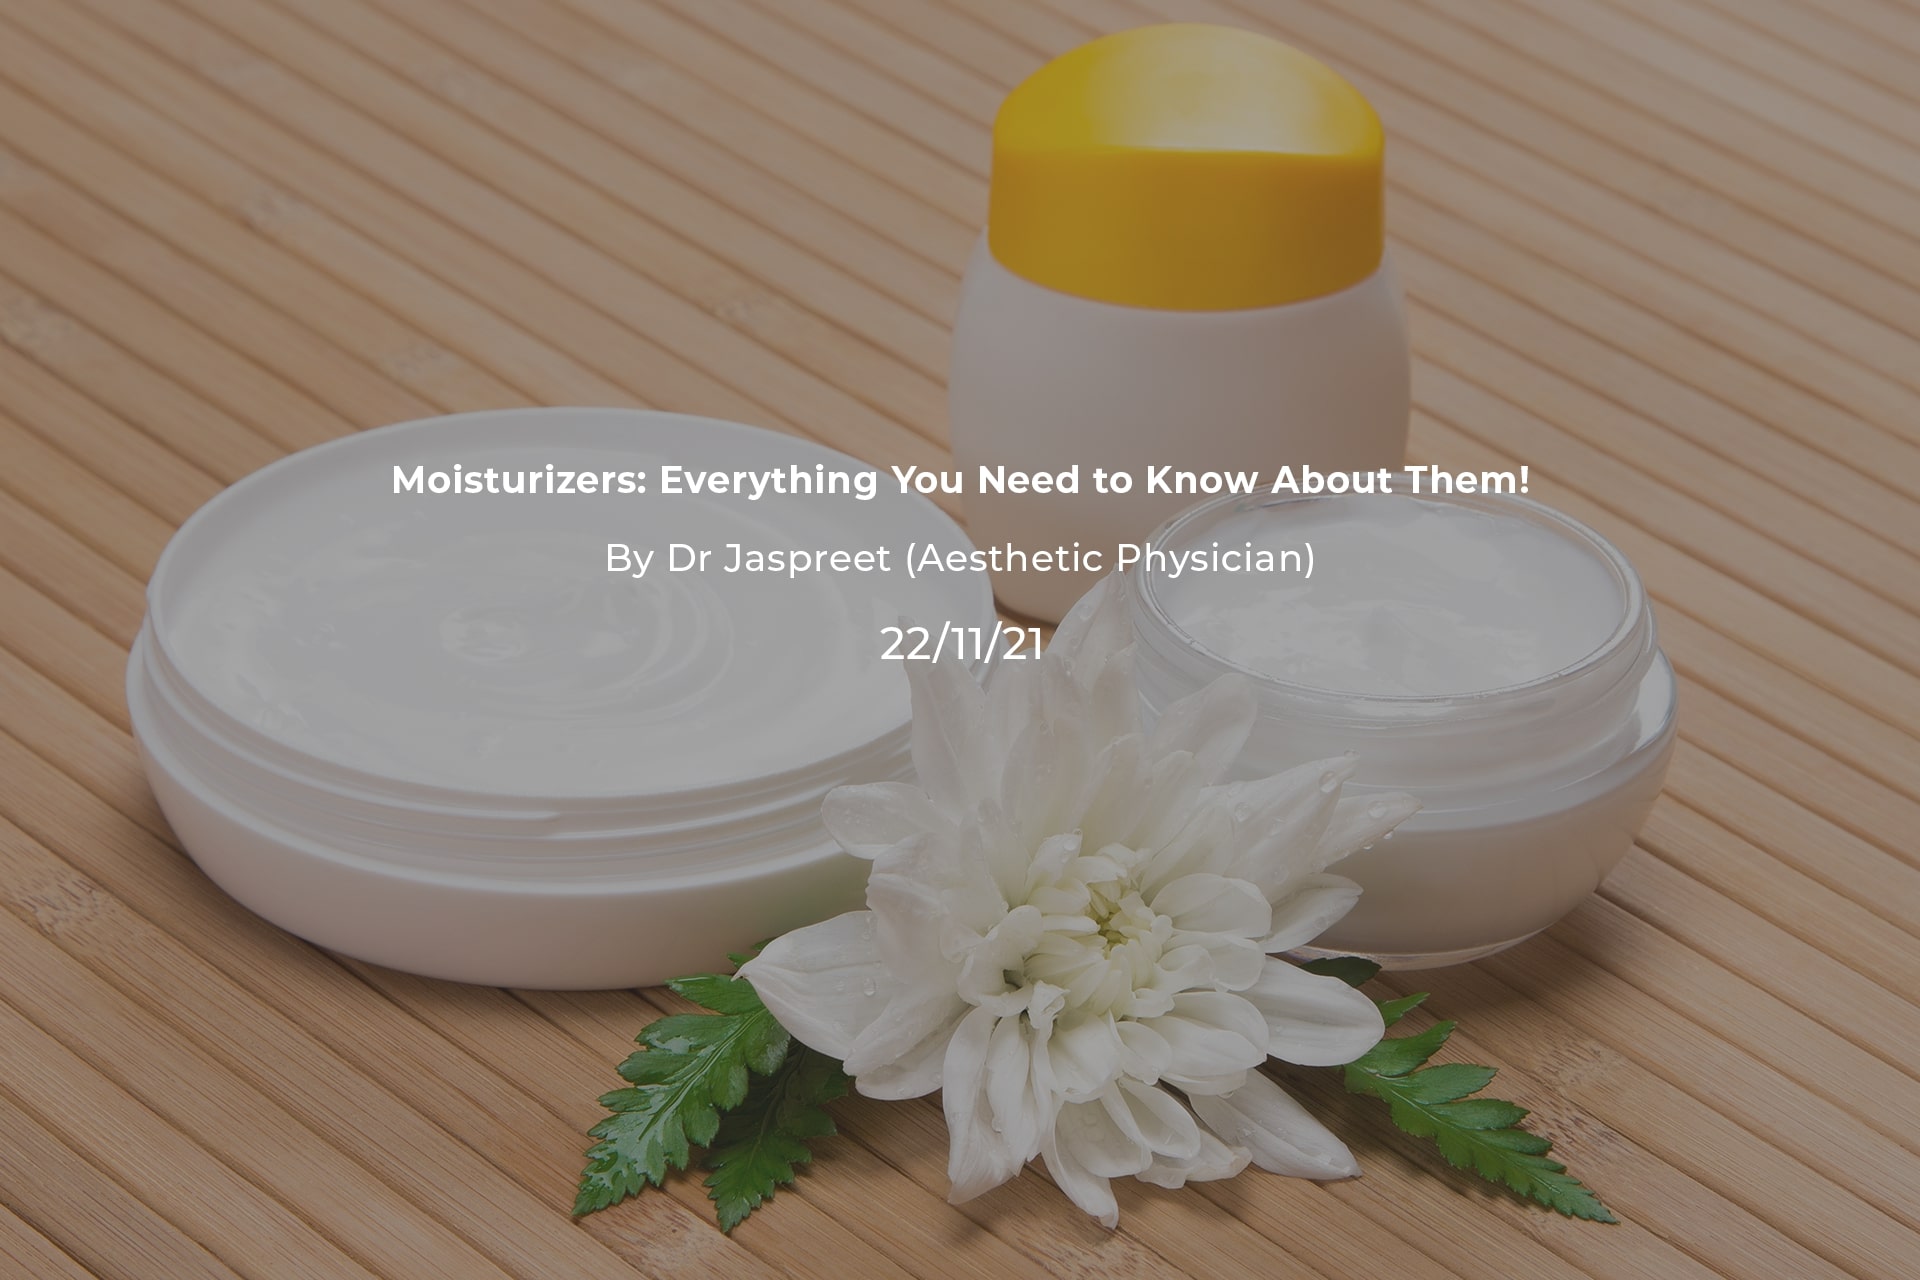 Moisturizers: Everything You Need to Know About Them!